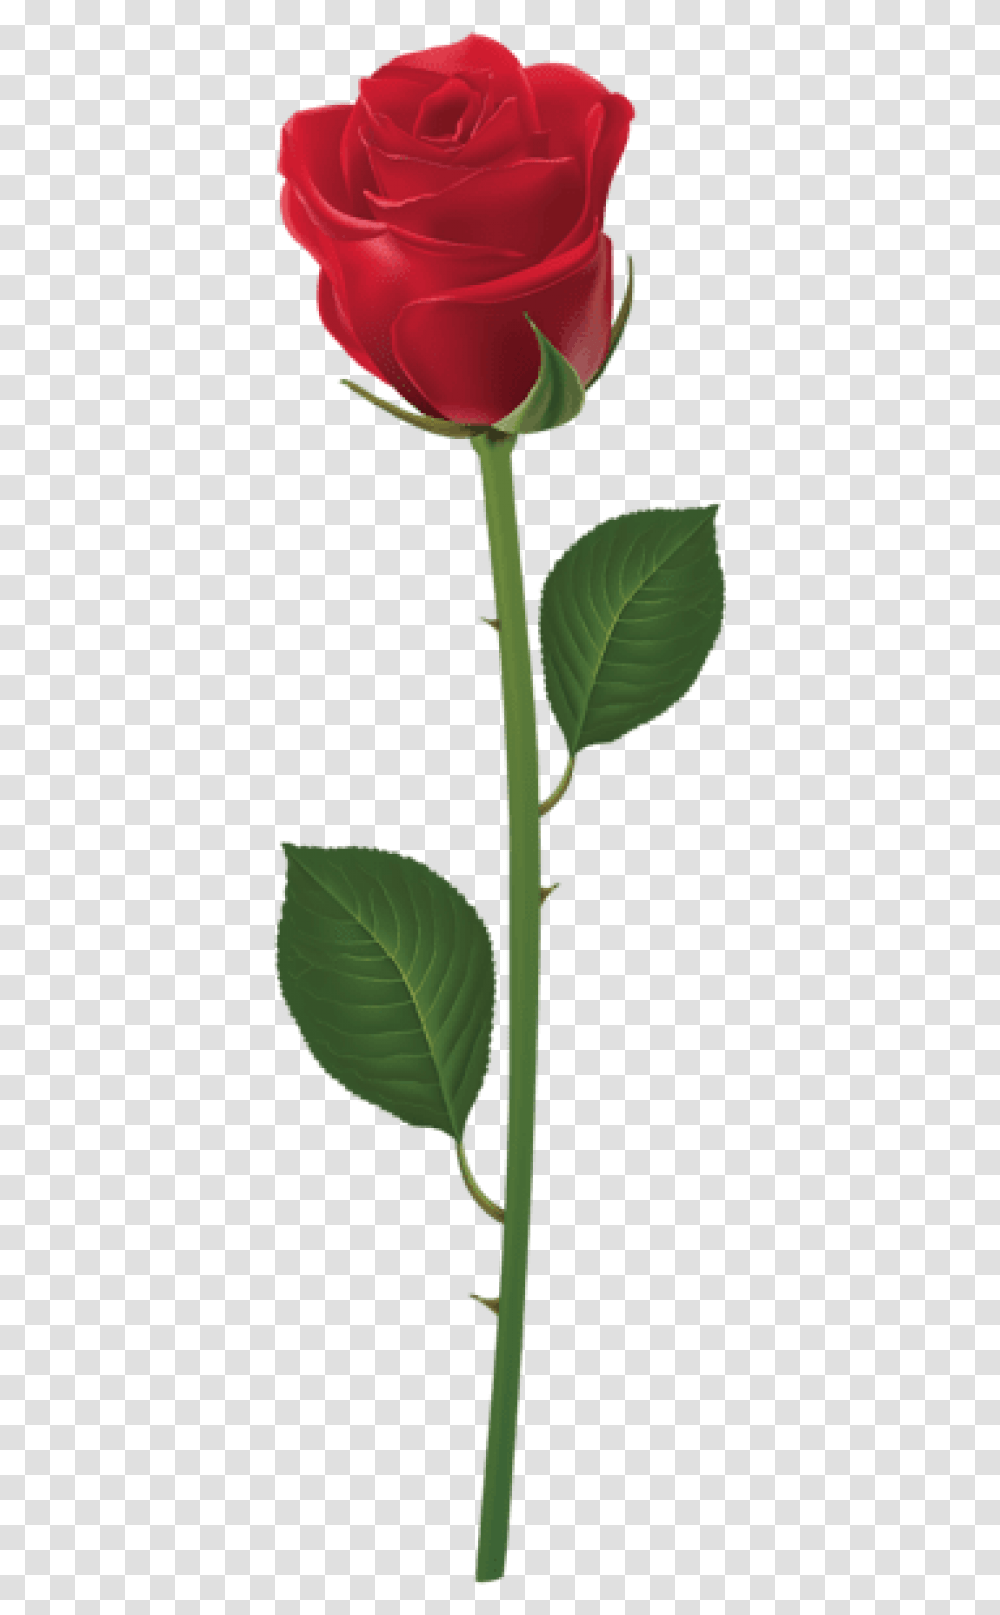 Free Rose With Stem Red Images Purple Rose With Stem, Leaf, Plant, Green, Flower Transparent Png